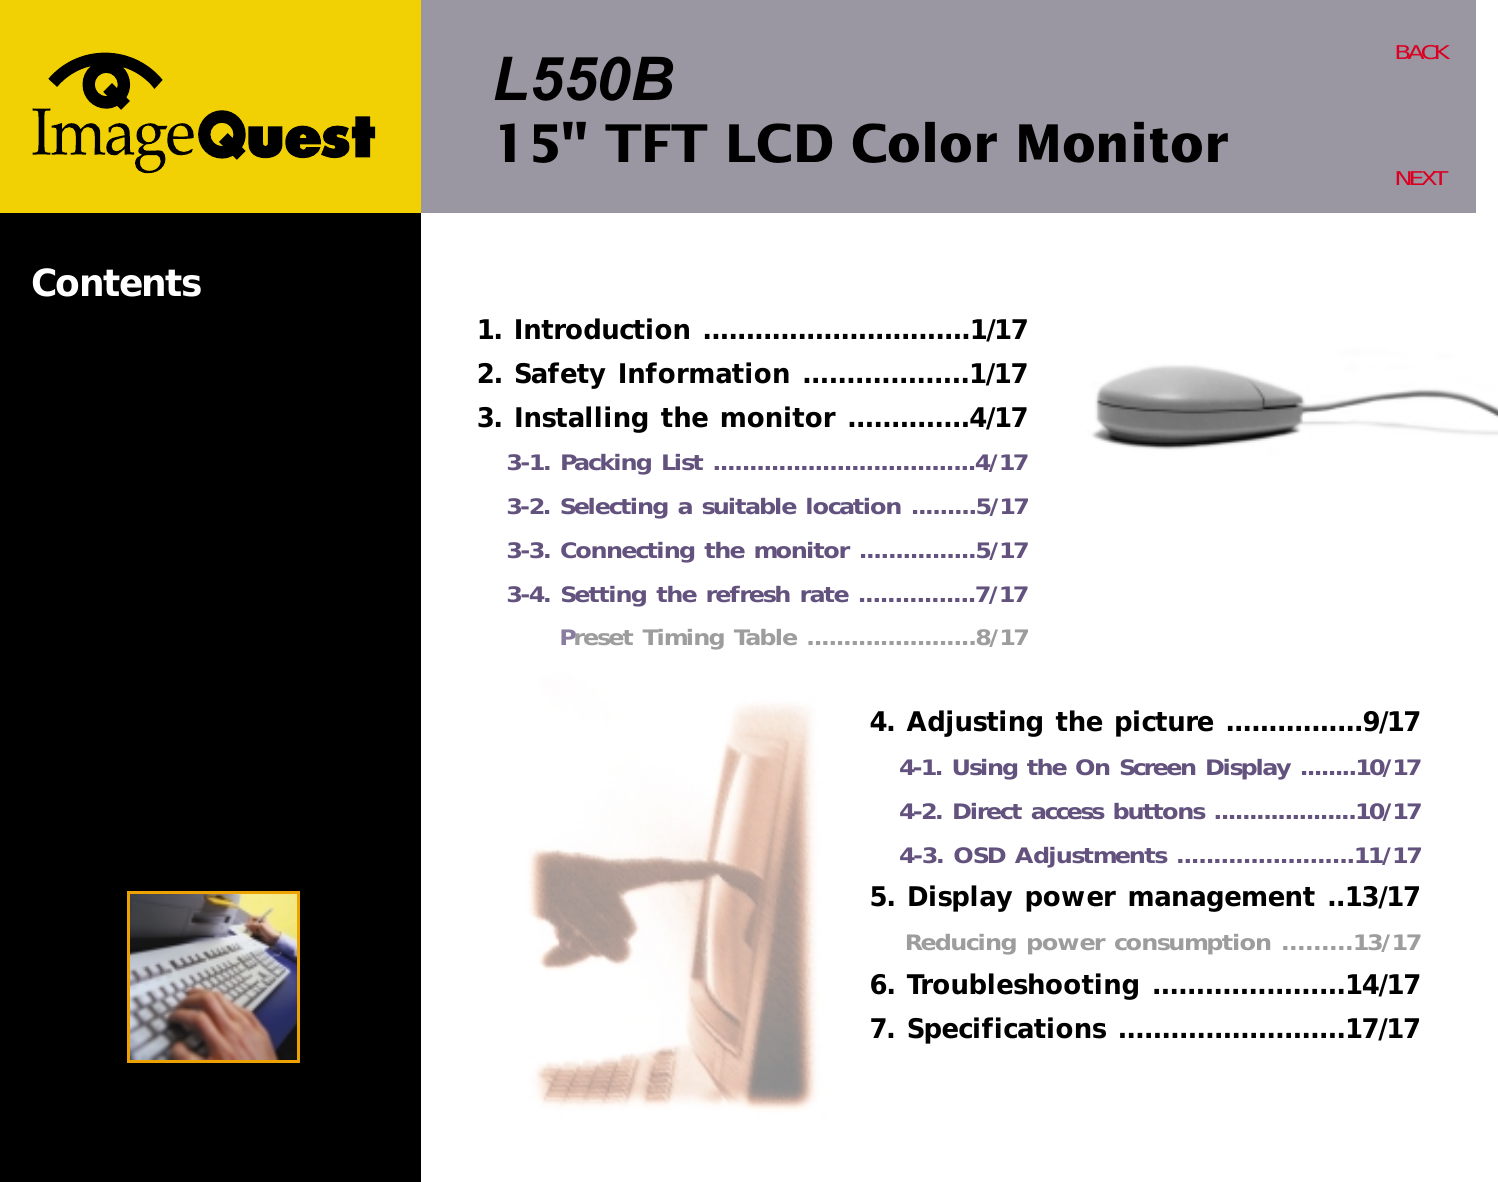 L550B15&quot; TFT LCD Color MonitorBACKNEXTContents4. Adjusting the picture ................9/174-1. Using the On Screen Display ........10/174-2. Direct access buttons ....................10/174-3. OSD Adjustments ........................11/175. Display power management ..13/17Reducing power consumption .........13/176. Troubleshooting ......................14/177. Specifications ..........................17/171. Introduction ...............................1/172. Safety Information ...................1/173. Installing the monitor ..............4/173-1. Packing List ....................................4/173-2. Selecting a suitable location .........5/173-3. Connecting the monitor ................5/173-4. Setting the refresh rate ................7/17Preset Timing Table .......................8/17